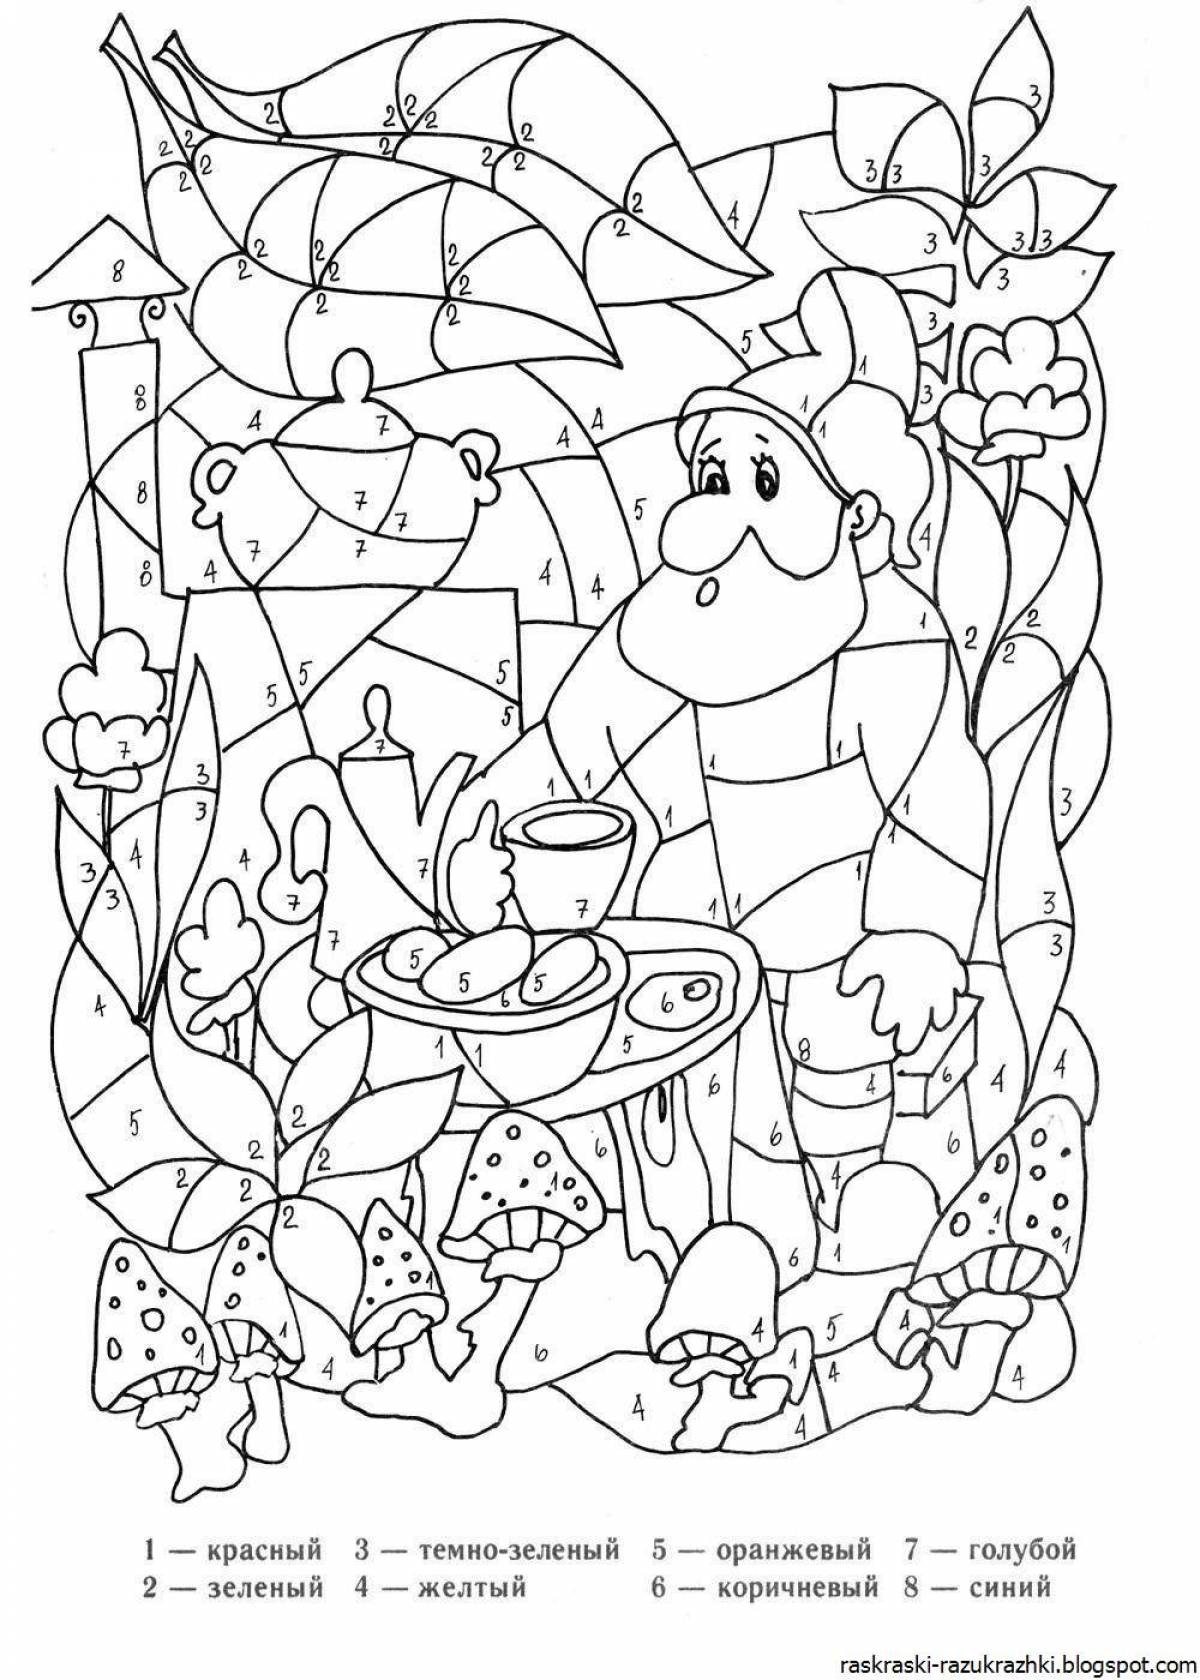 Coloring book for children 8-9 years old